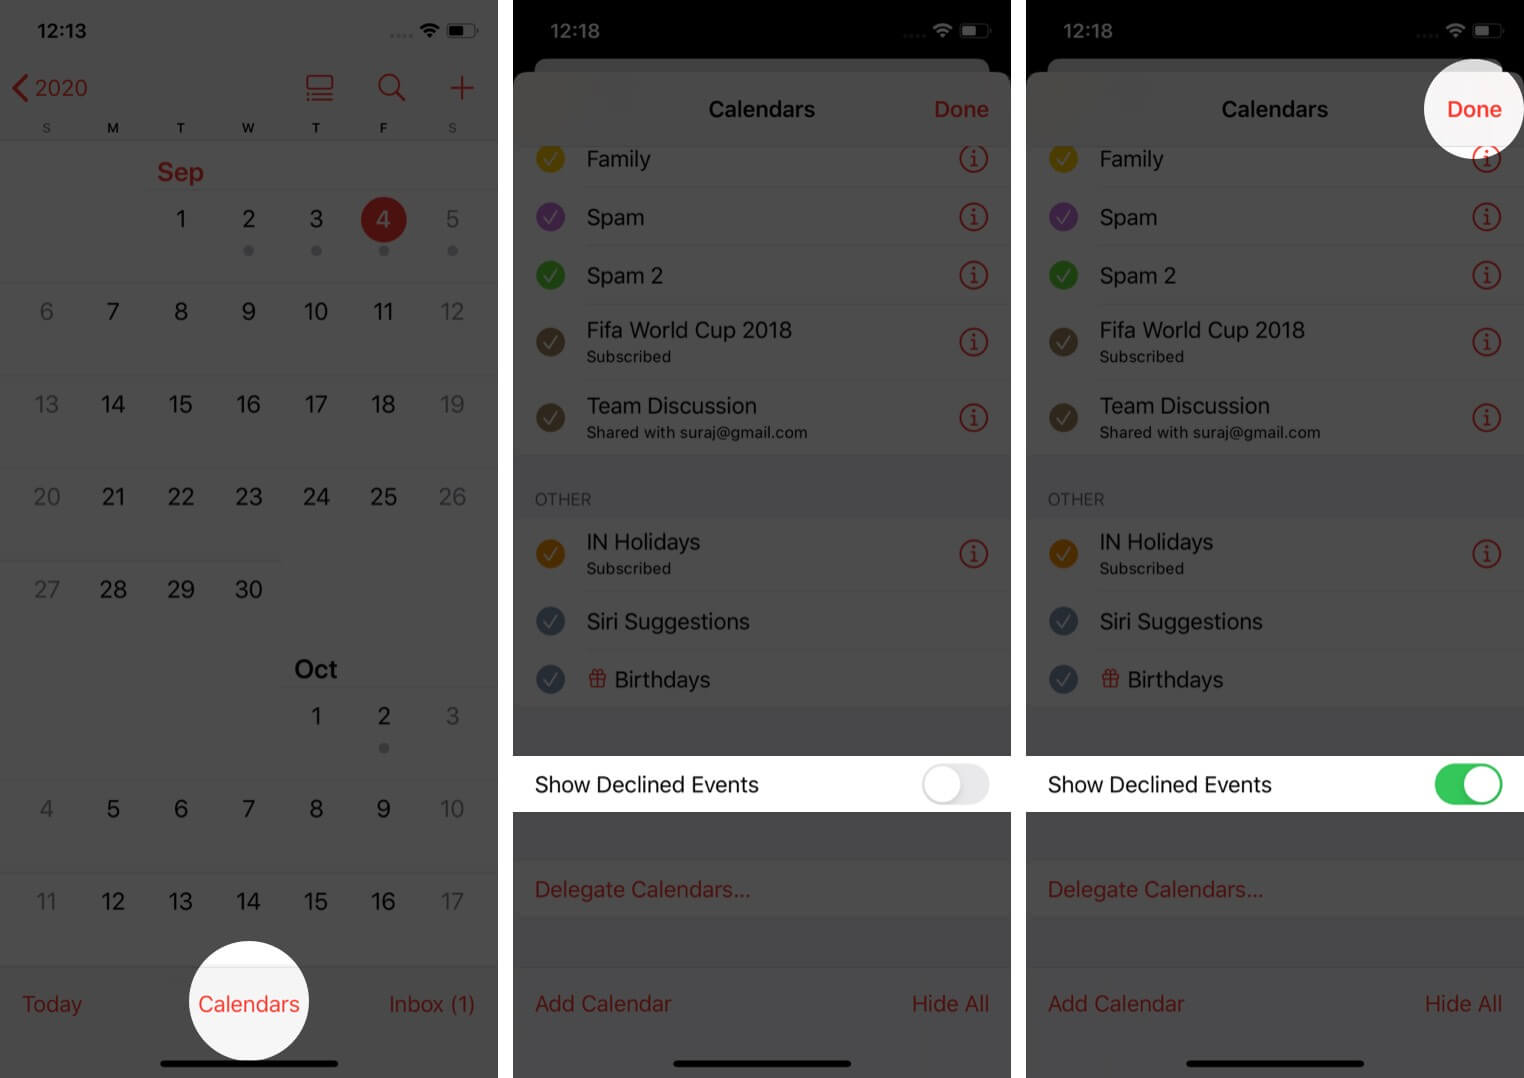 tap on calendars and enable show declined events to view declined events in iphone calendar